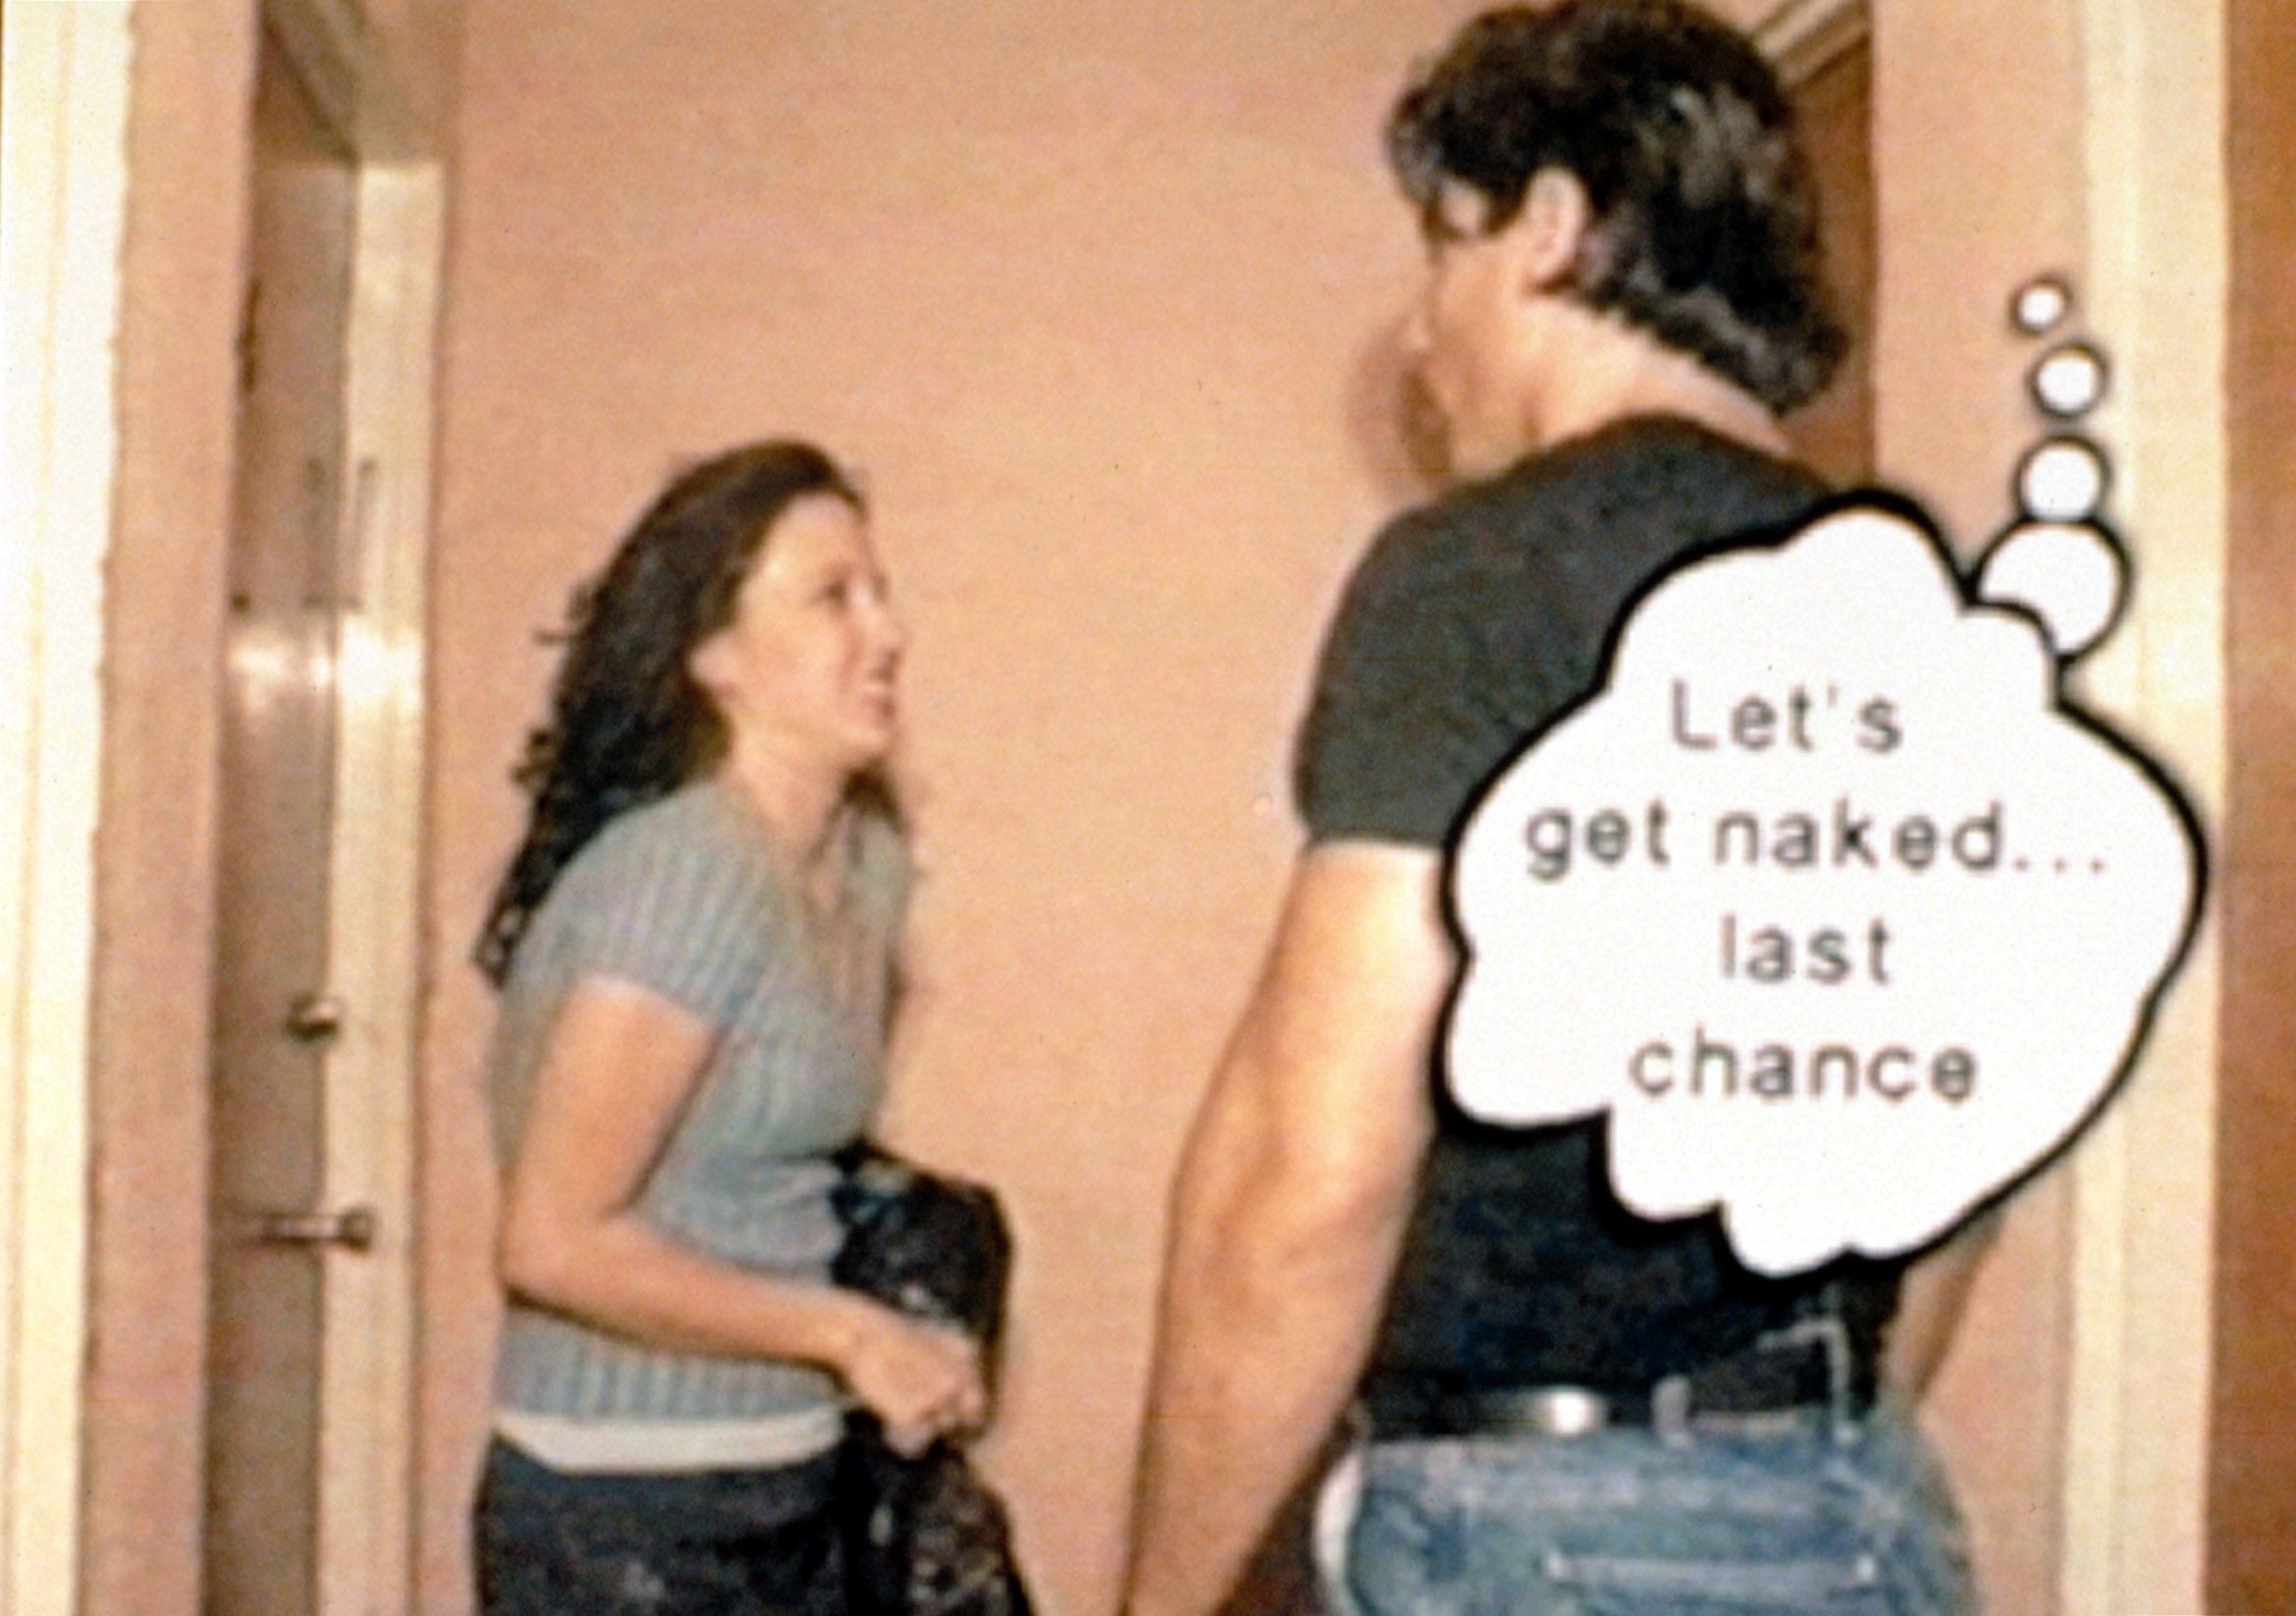 Image of a man and woman in a heated conversation with a thought bubble saying &quot;Let&#x27;s get naked... last chance&quot;